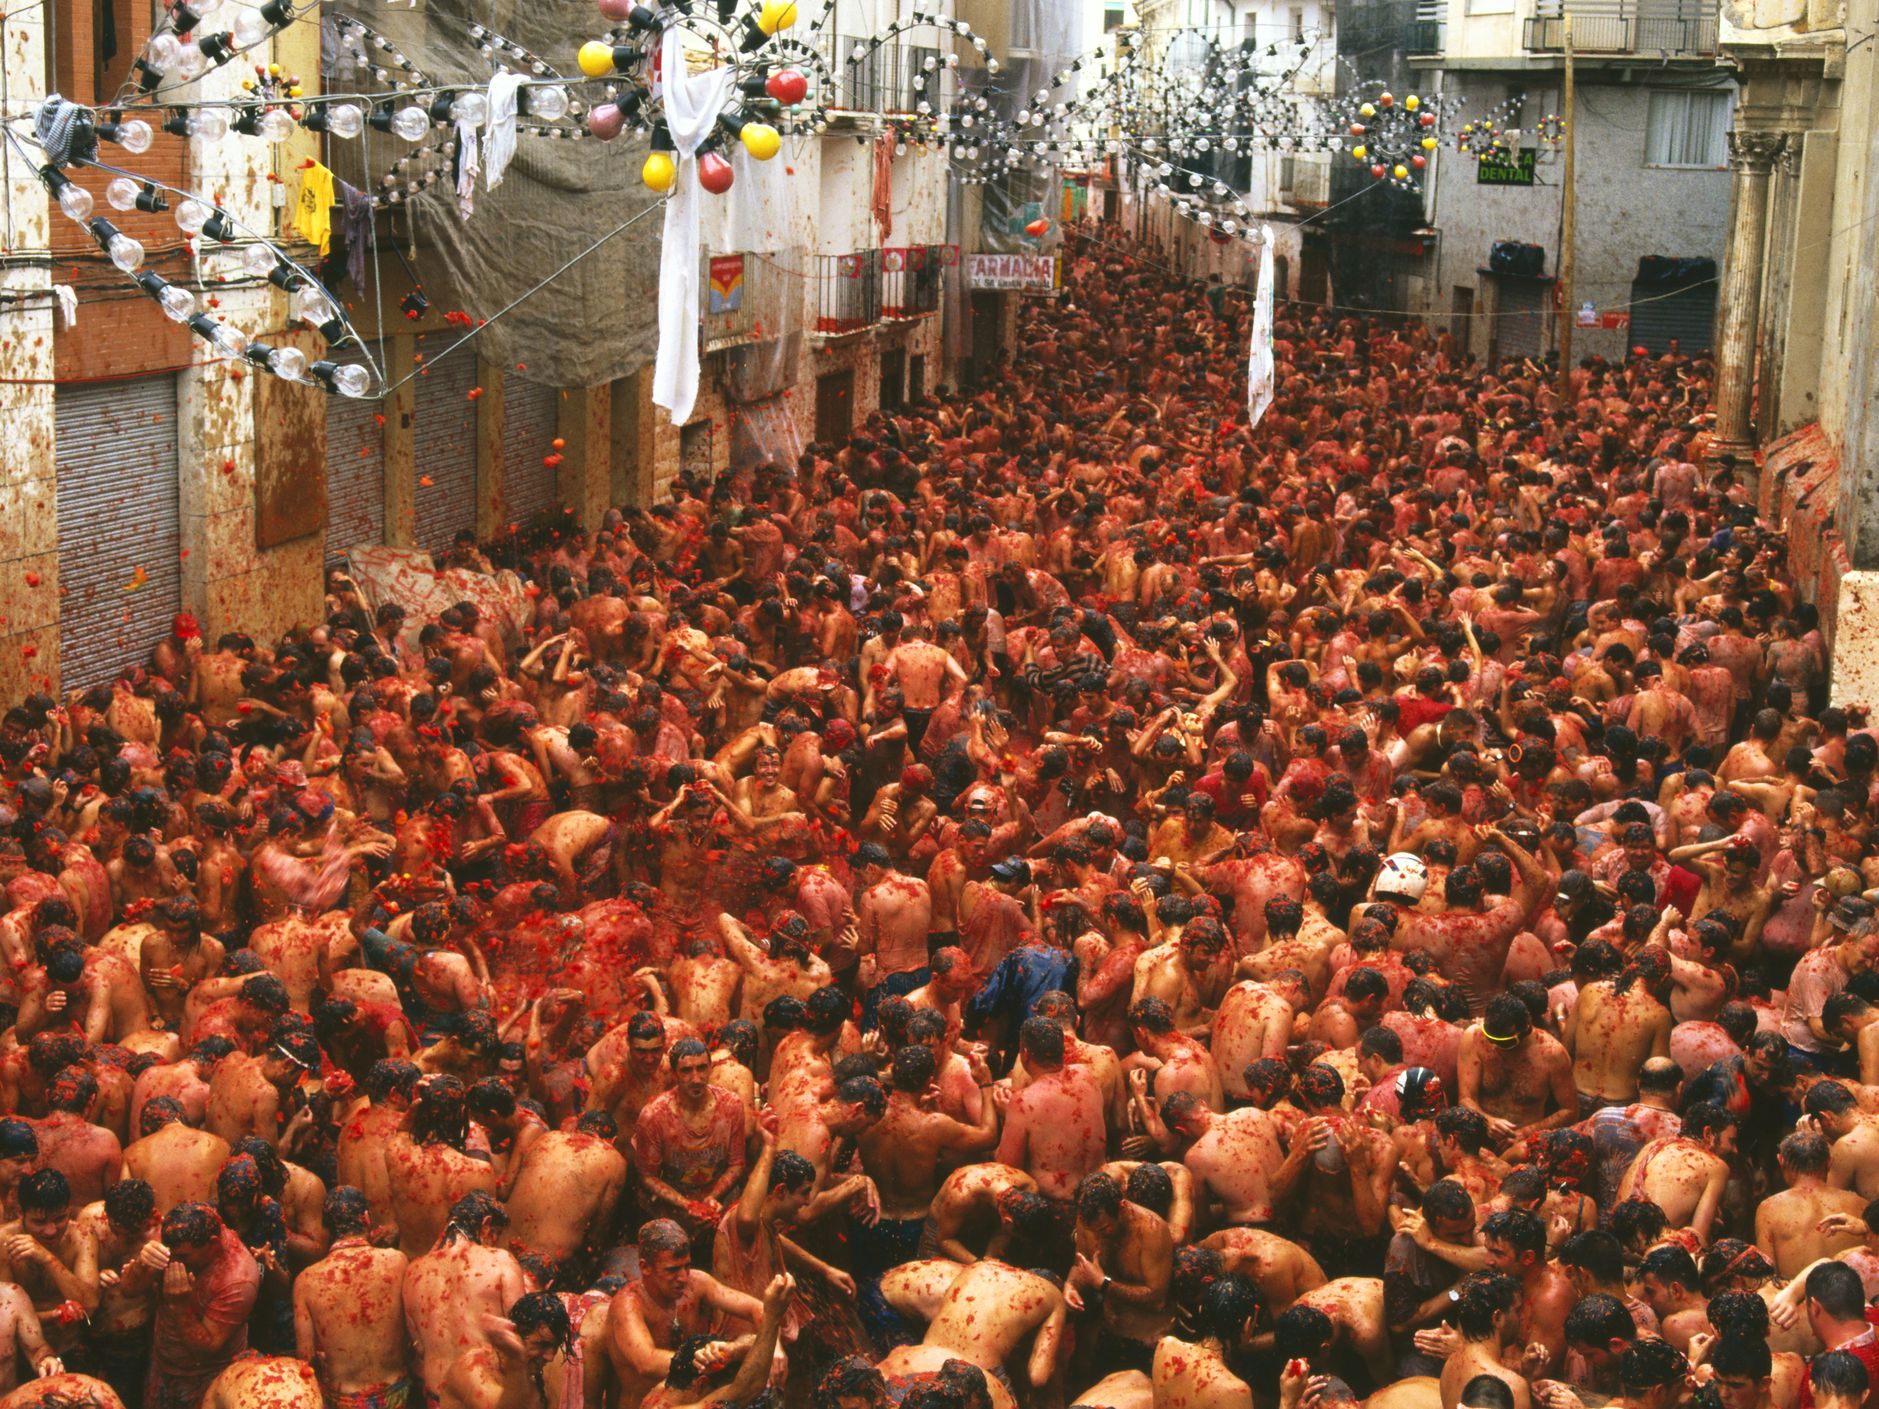 Tomatina Festival 2022: The Biggest Festival In Spain Is Back After Covid, Read More Here